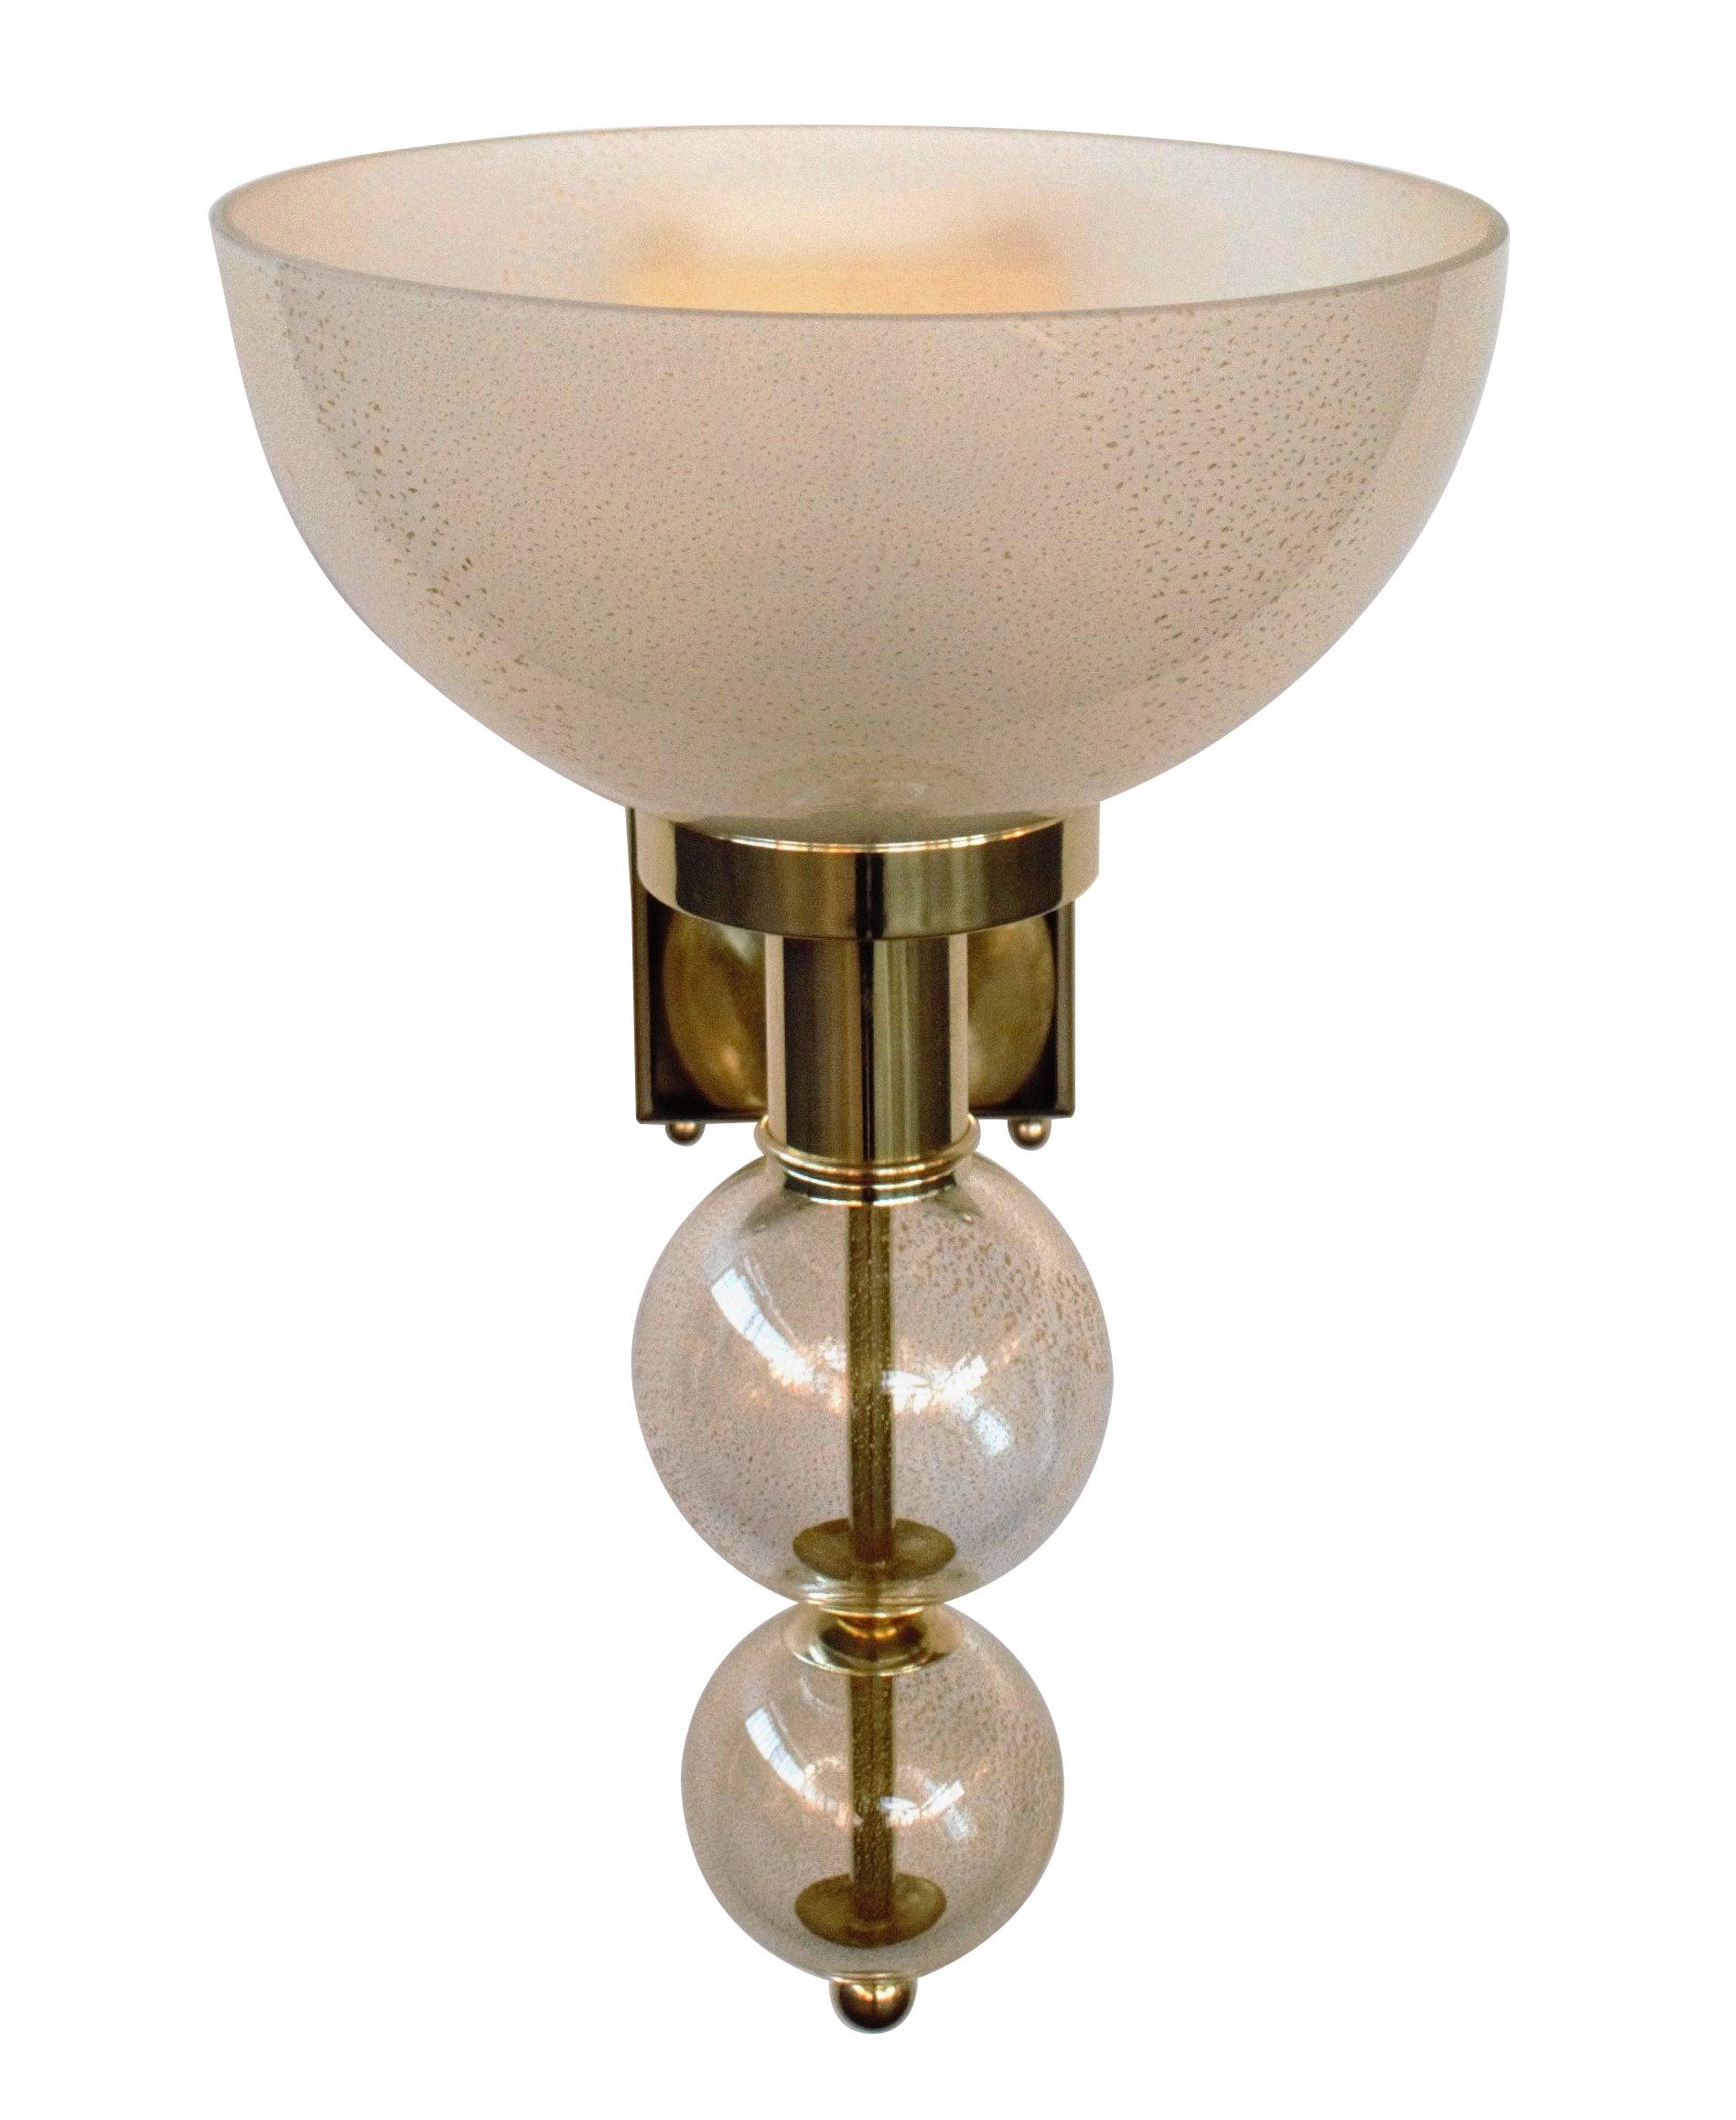 Italian wall light with clear and frosted Murano glass hand blow with gold flecks inside the glass, mounted on polished finish brass frame / Designed by Fabio Bergomi for Fabio Ltd / Made in Italy
1 light / E26 or E27 type / max 40W 
Measures: